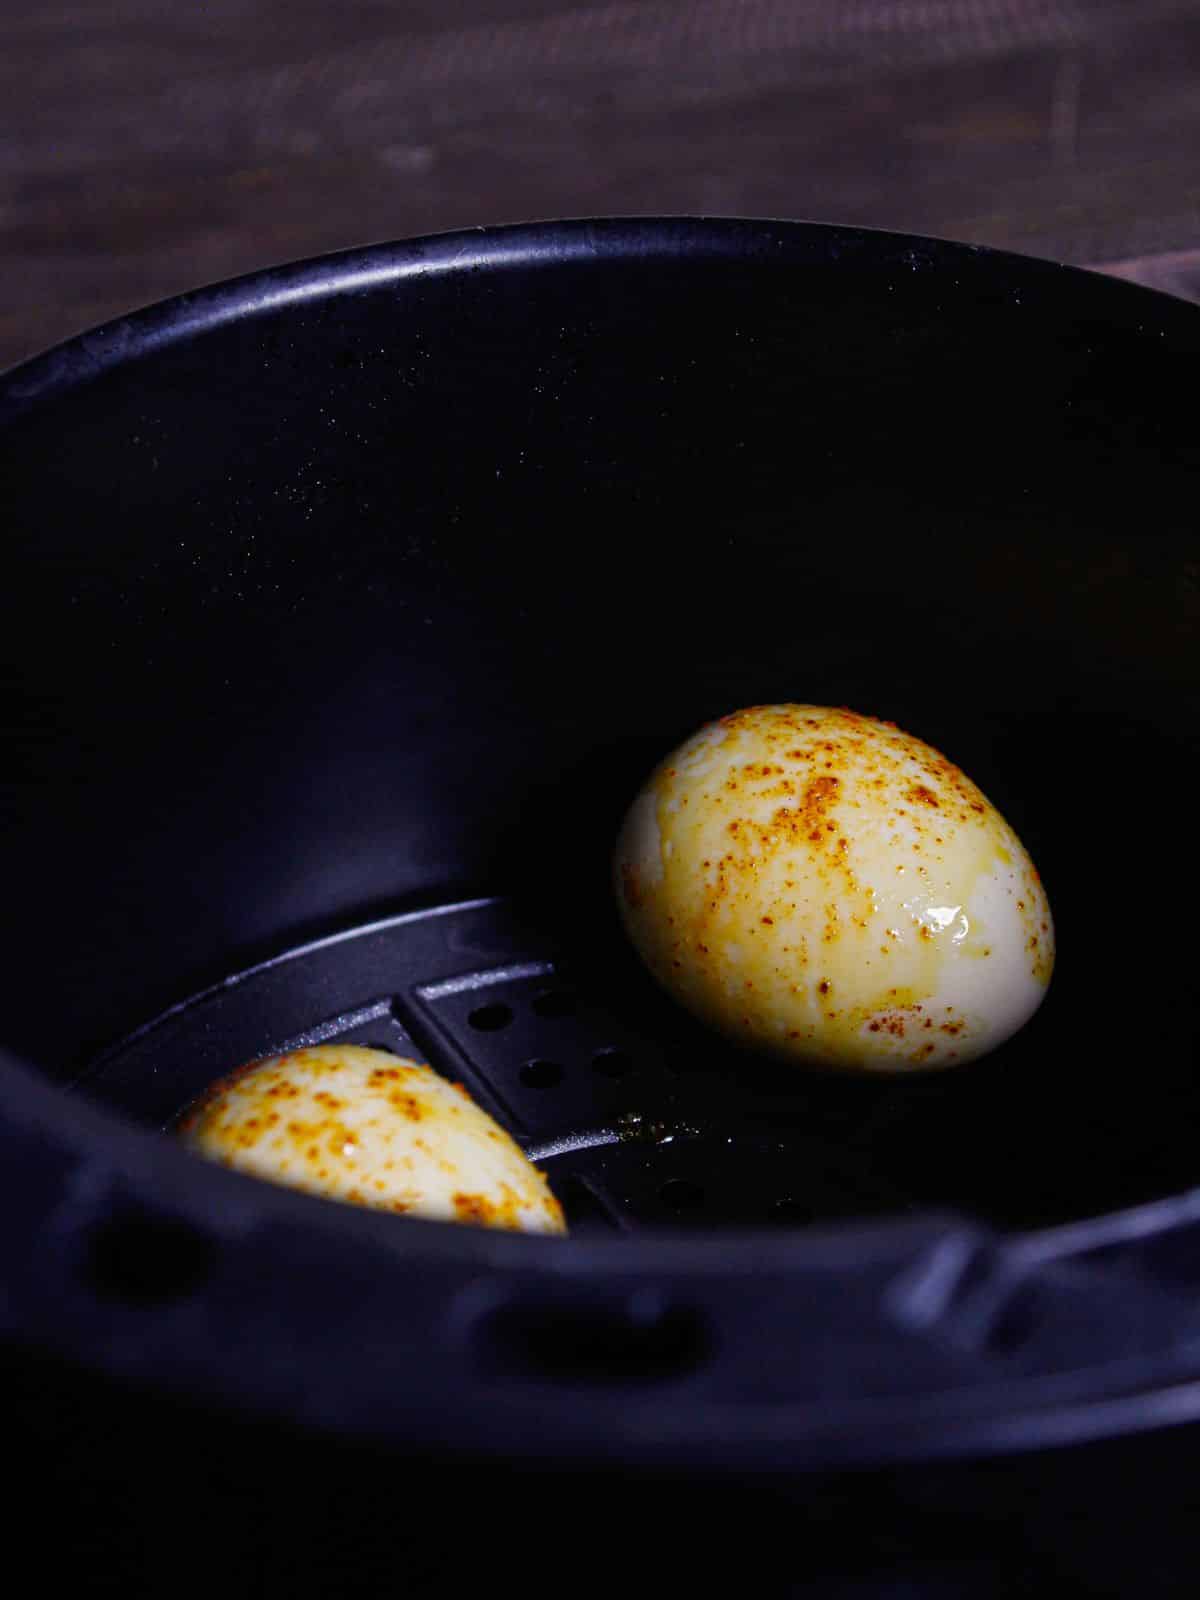 Transfer the marinated egg into air fryer and cook